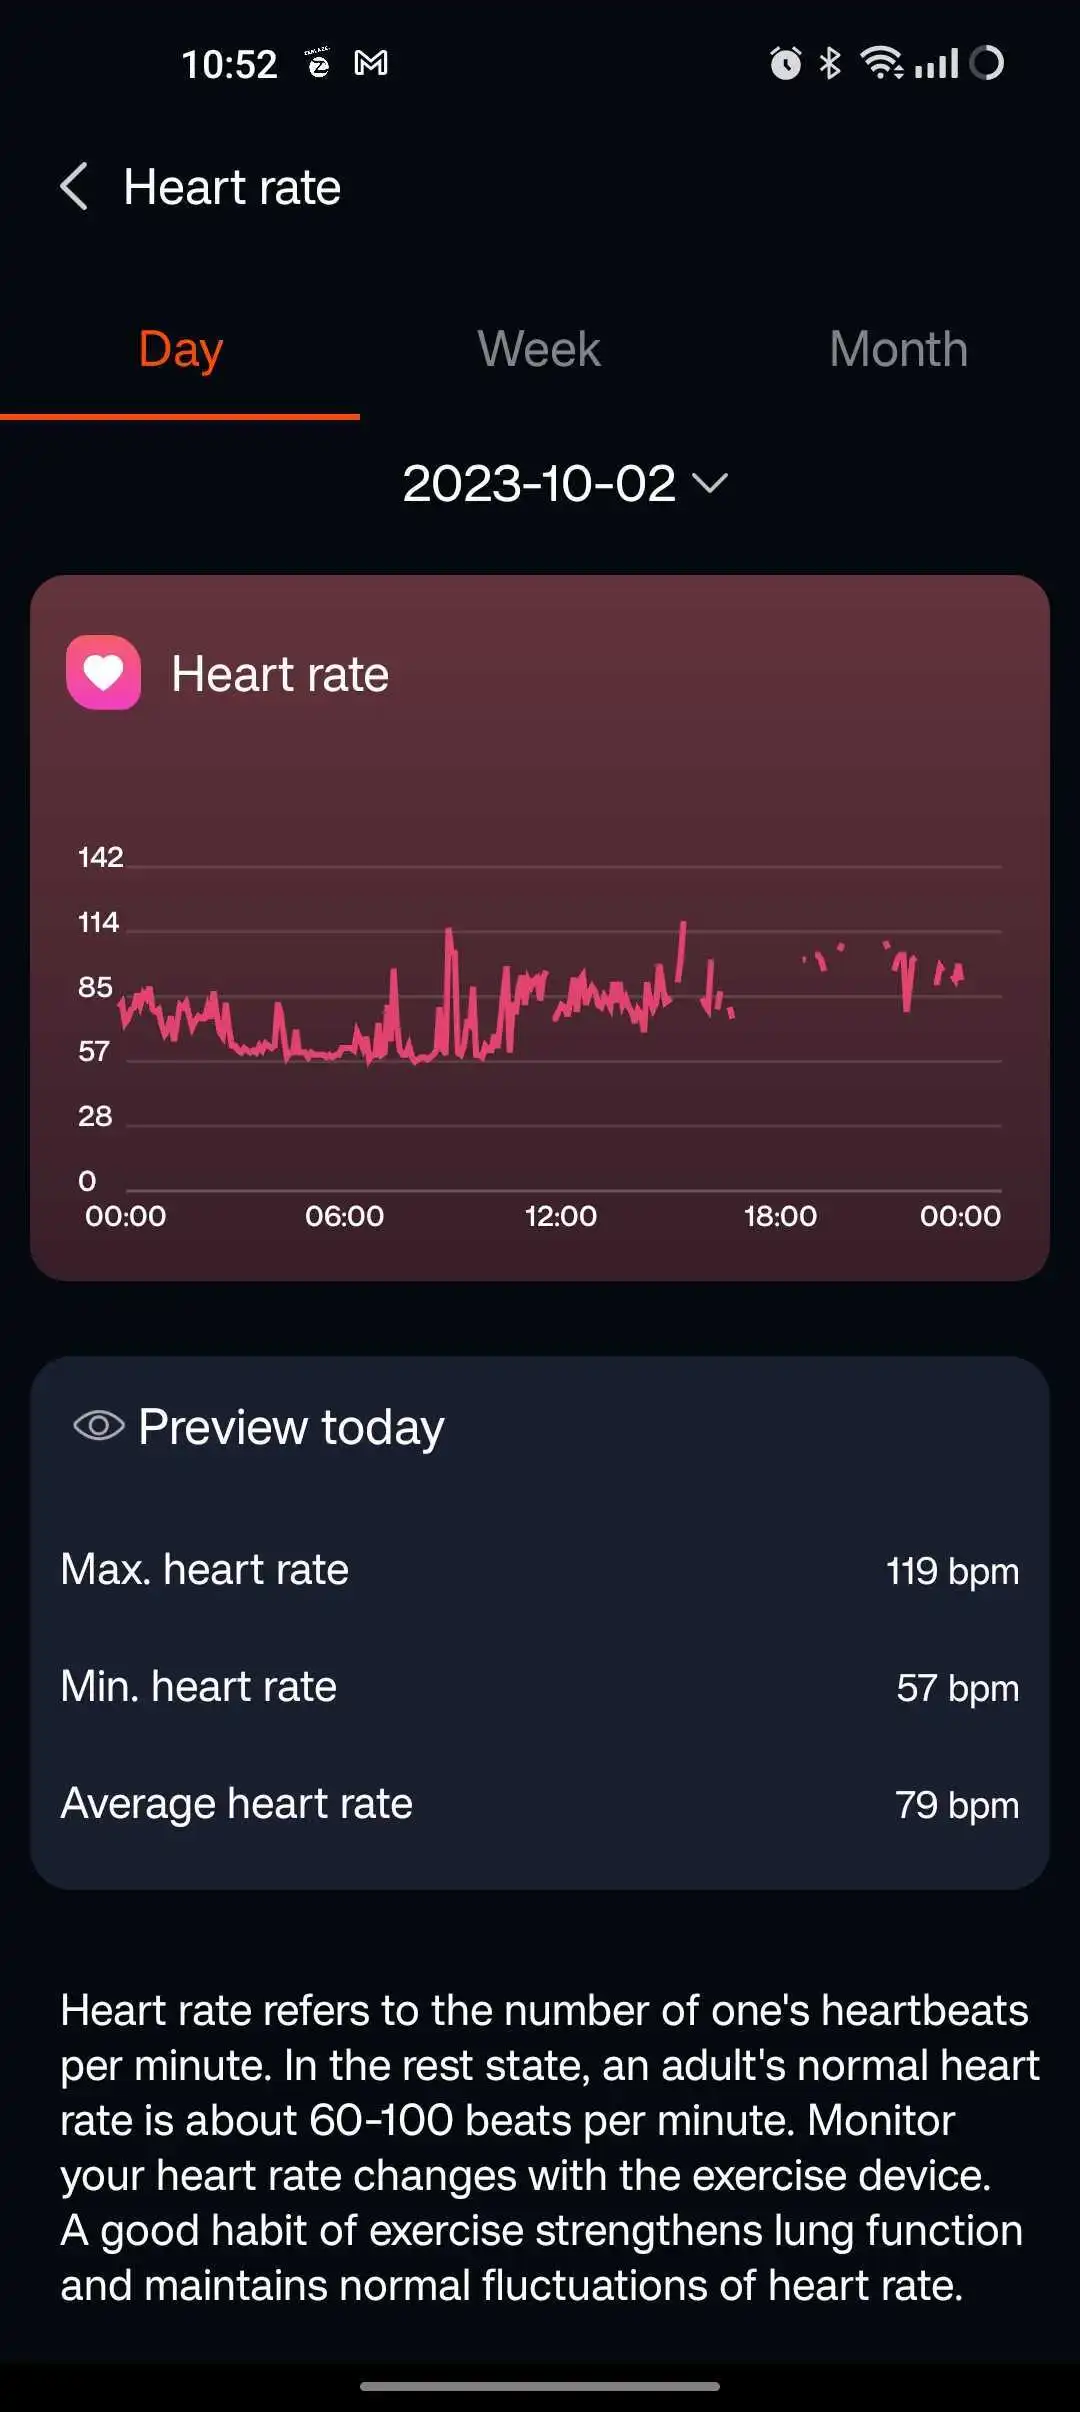 Daily Heart Rate Tracking